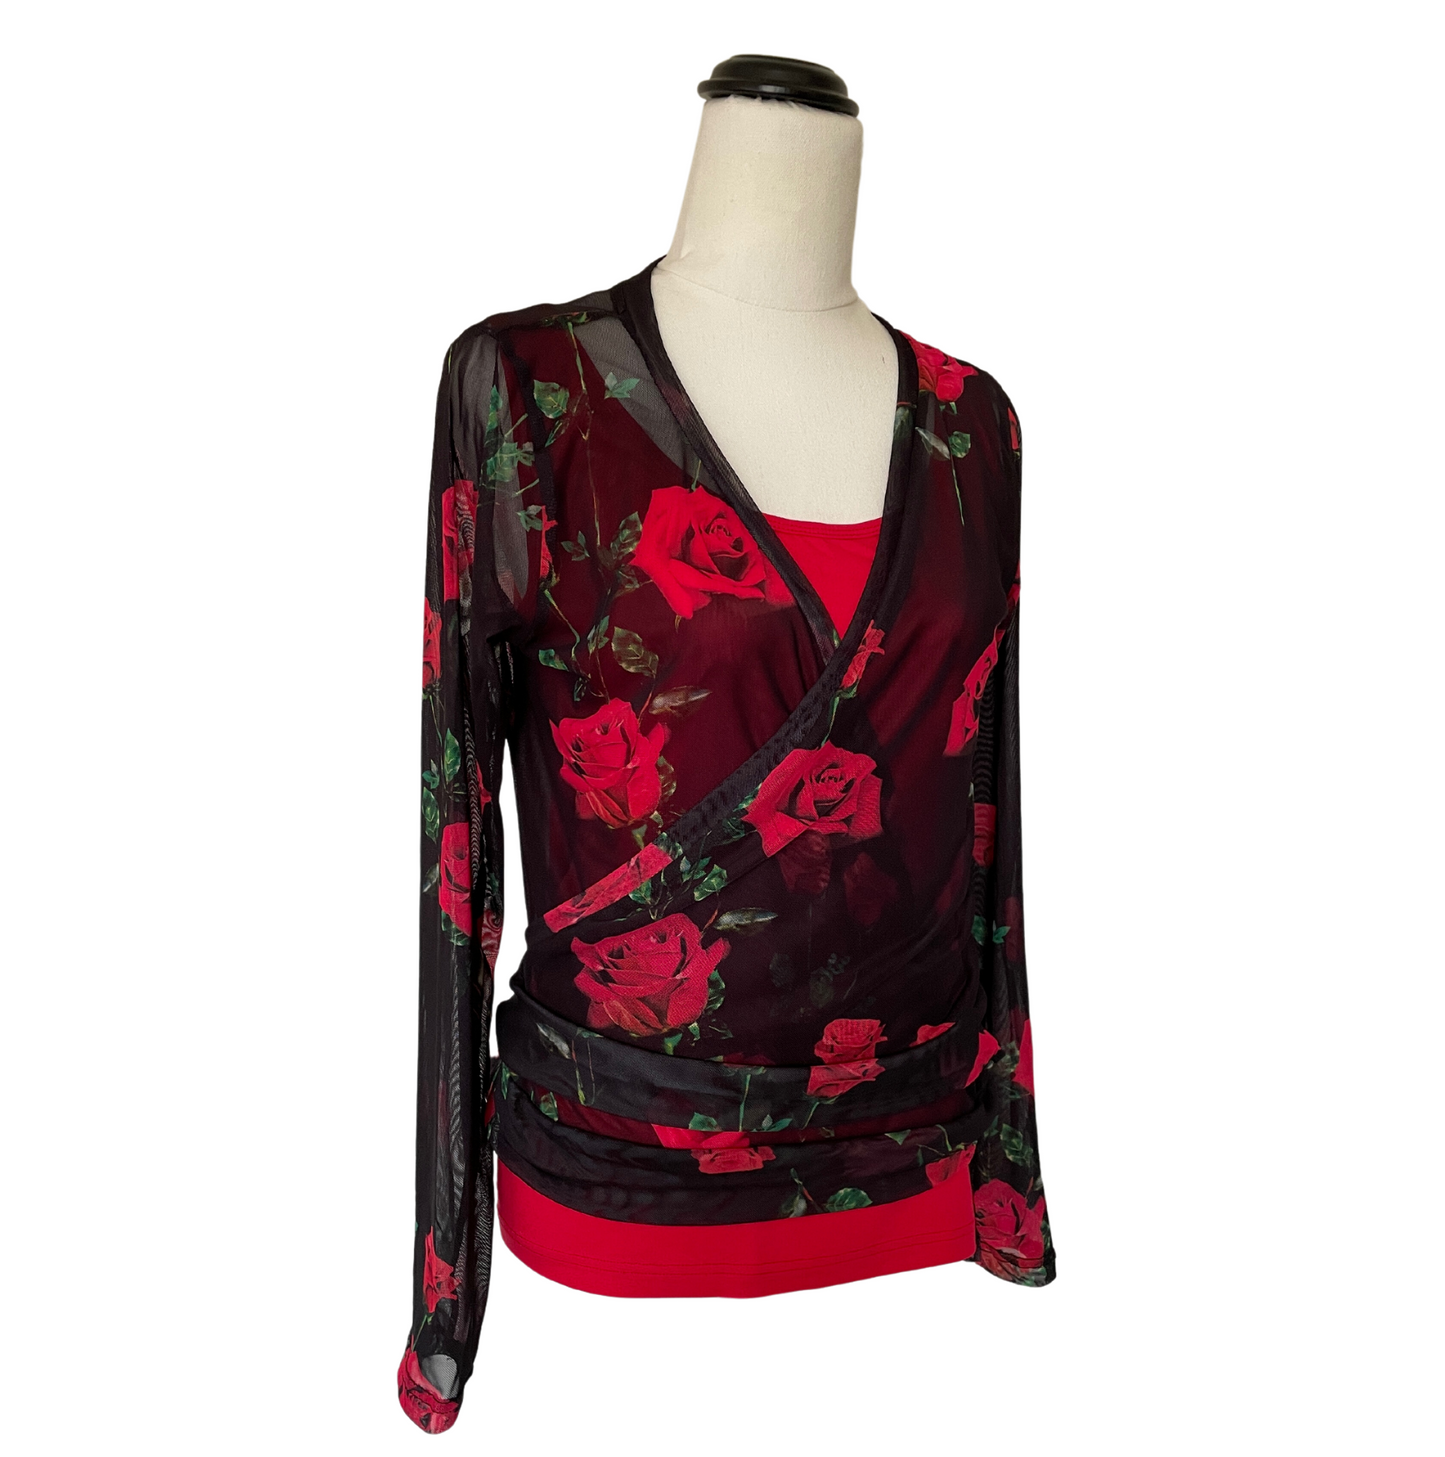 Mesh Stretch Ballerina Wrap Top Red Roses